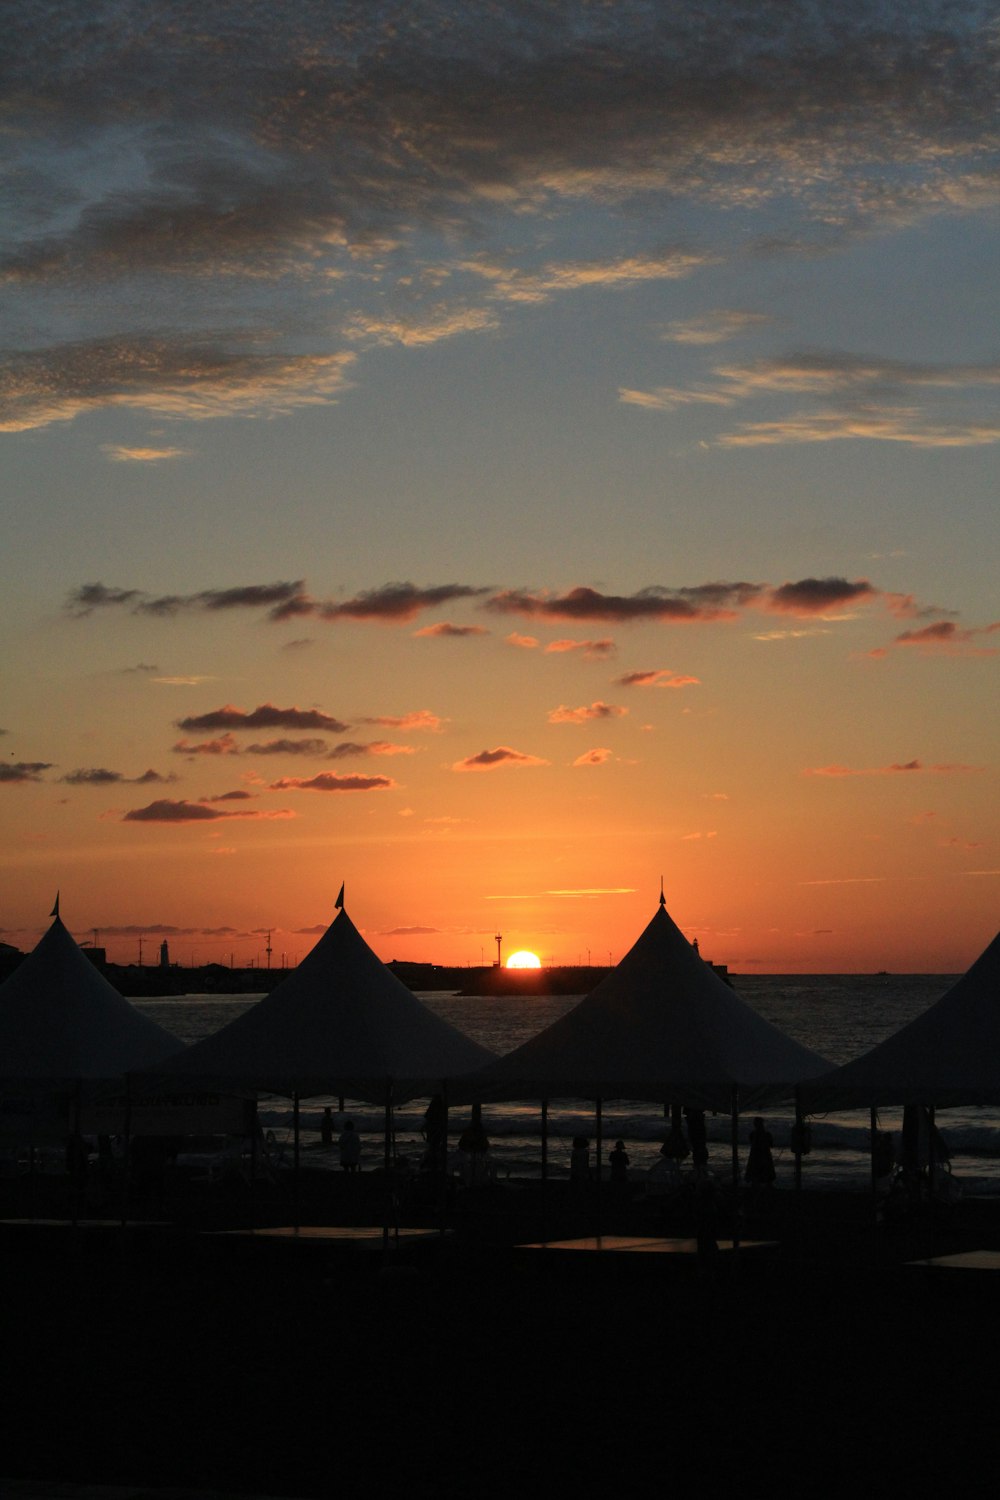 a group of tents at sunset